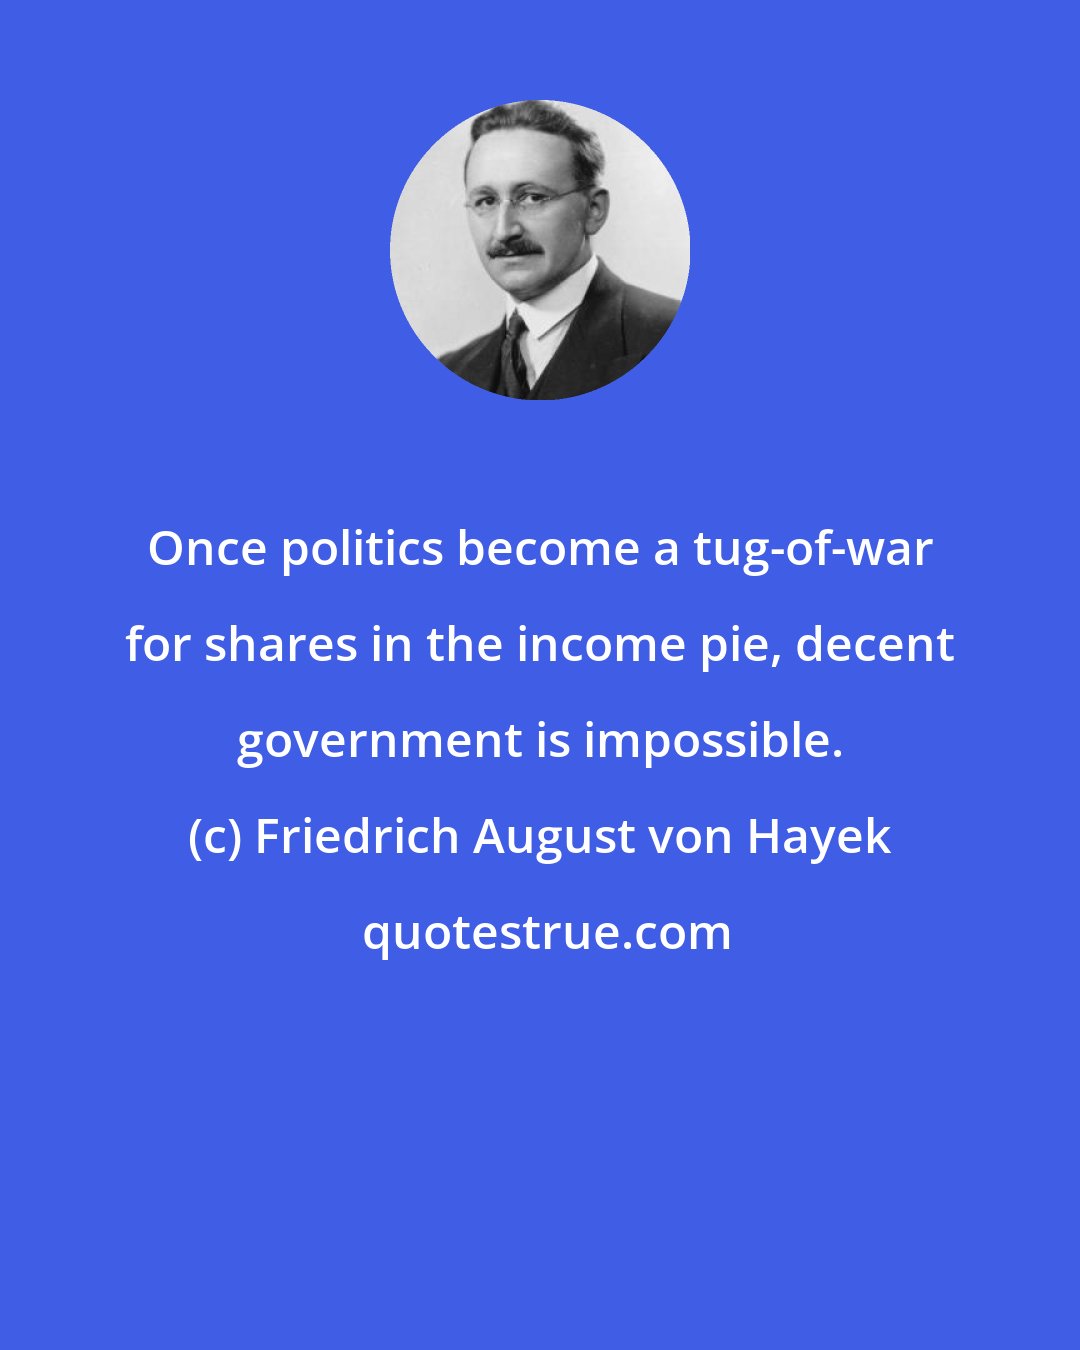 Friedrich August von Hayek: Once politics become a tug-of-war for shares in the income pie, decent government is impossible.